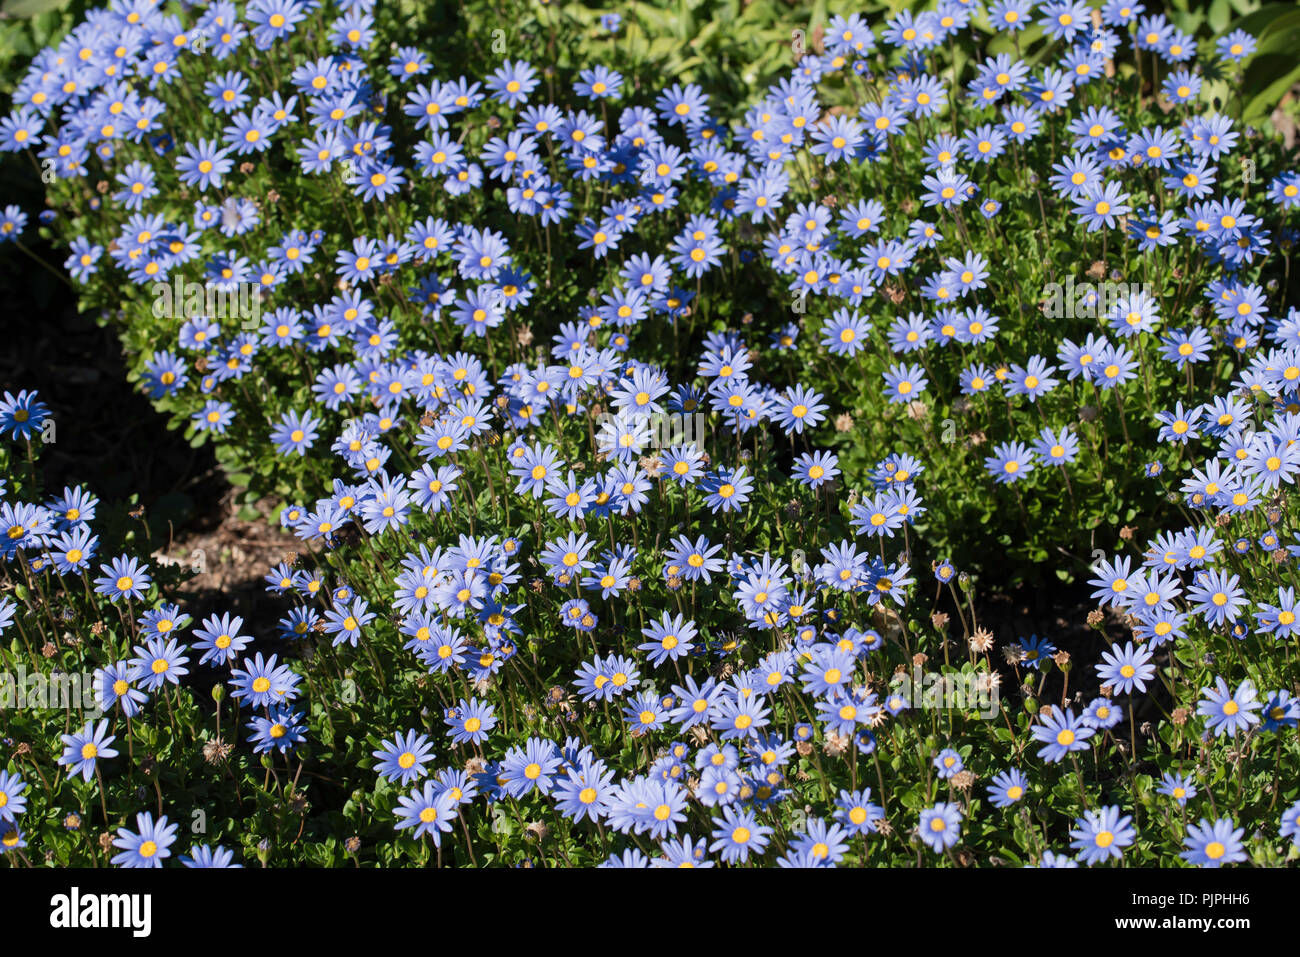 Originally from South Africa this vibrant display of Blue Marguerite Daisies (Felicia amelloides) is thriving in a garden bed under the Australian sun. Stock Photo